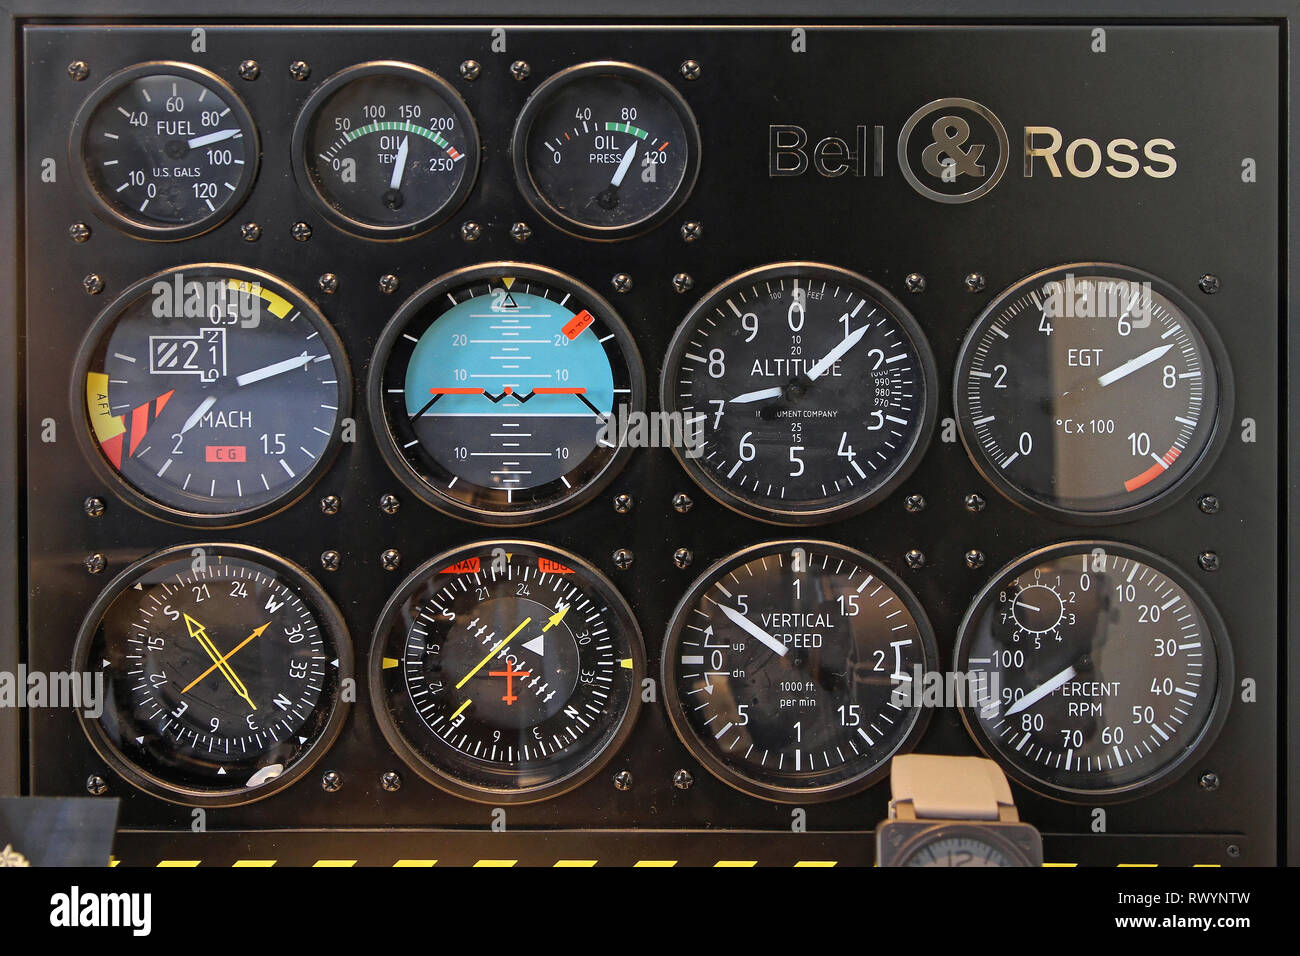 Paris, France - January 07, 2010: Bell and Ross Display Case With Flight Instruments Panel in Paris, France. Stock Photo